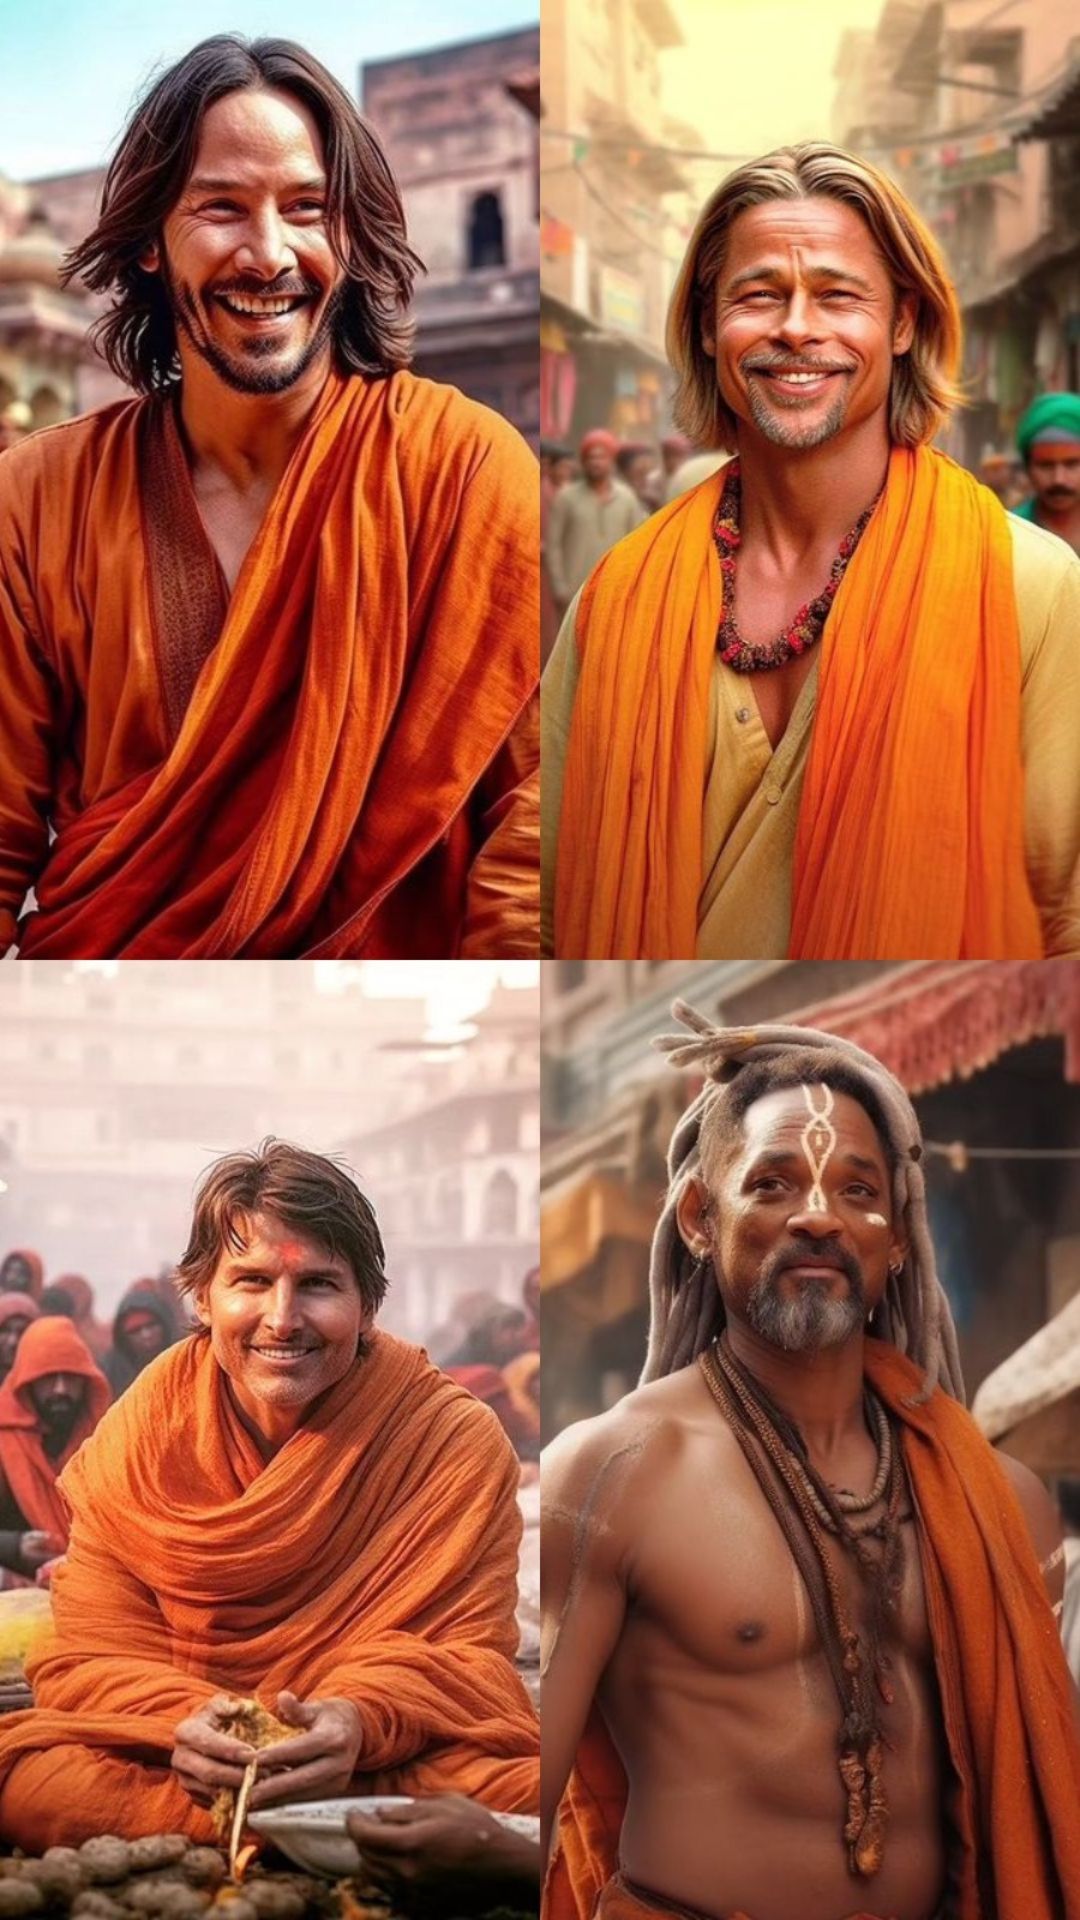 AI transforms Hollywood actors into Indian pandits